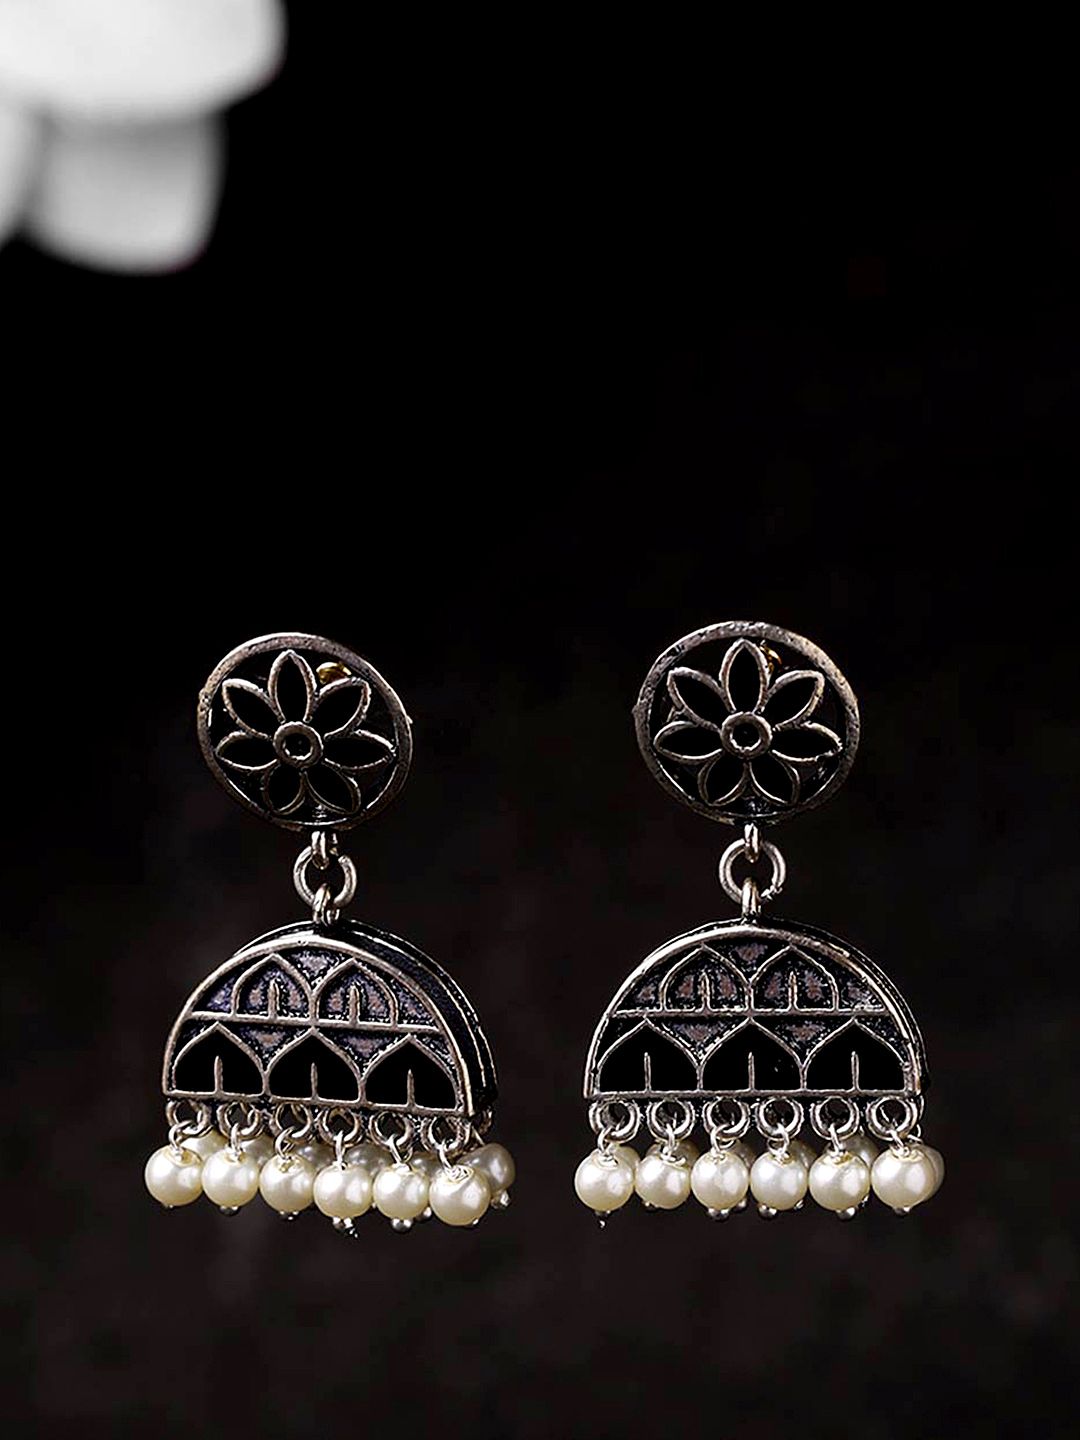 Voylla Silver-Toned Dome Shaped Jhumkas Price in India